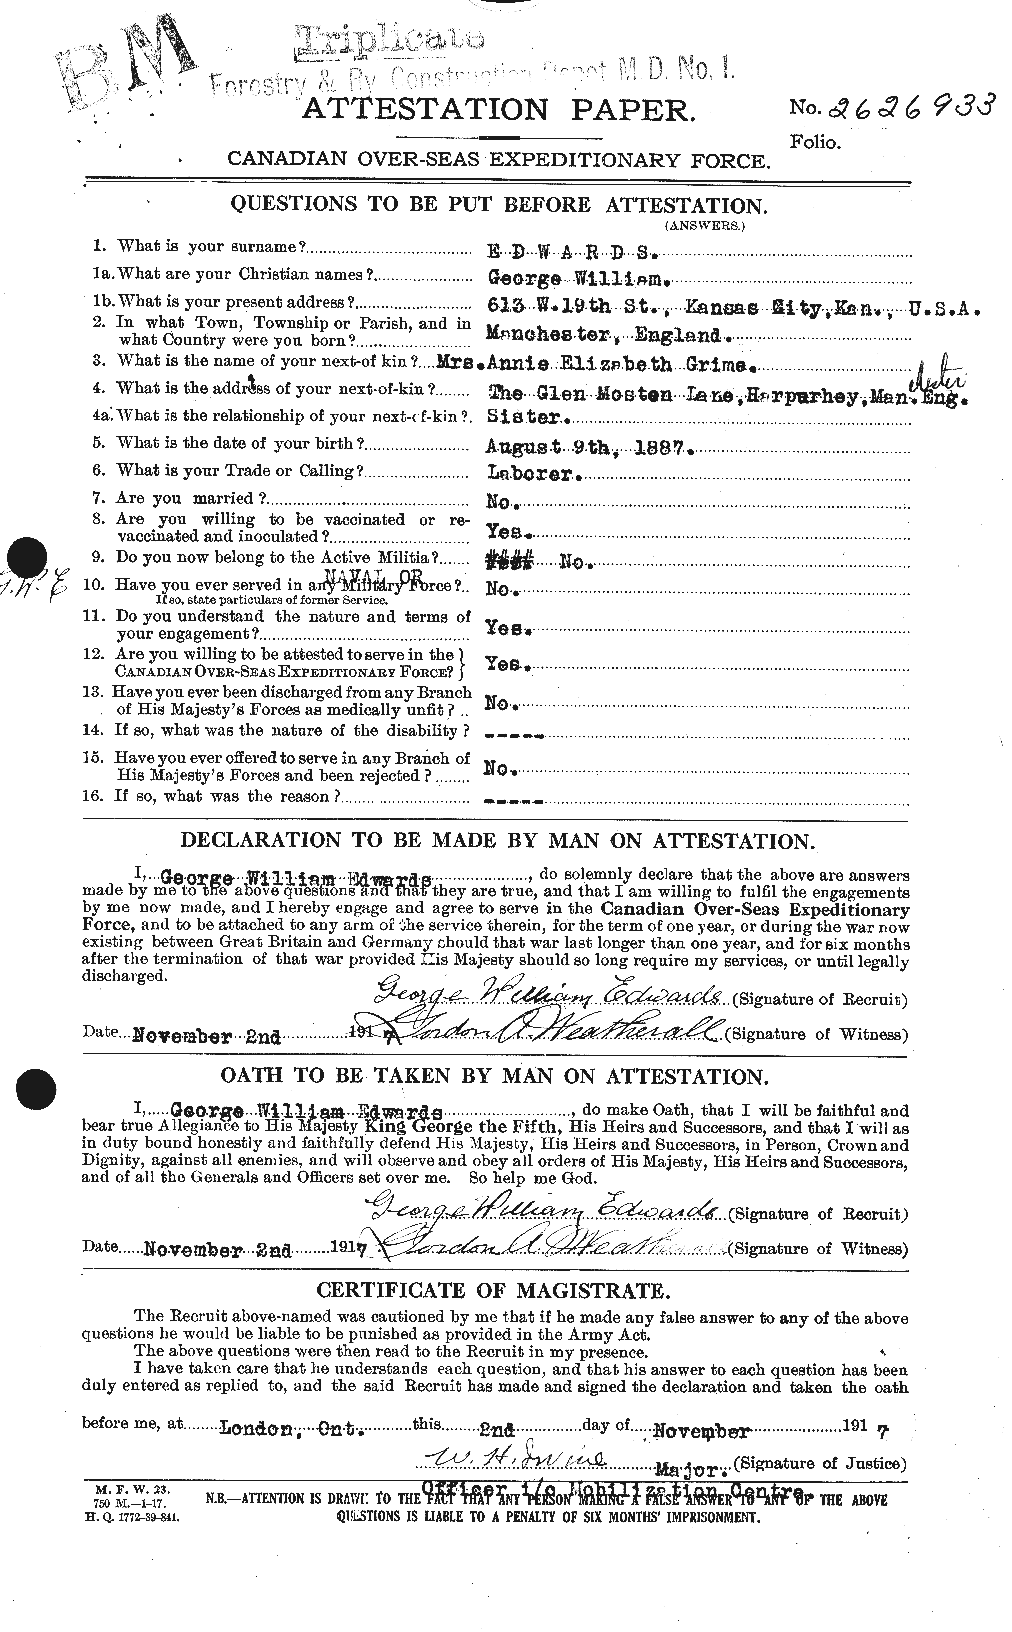 Personnel Records of the First World War - CEF 309698a